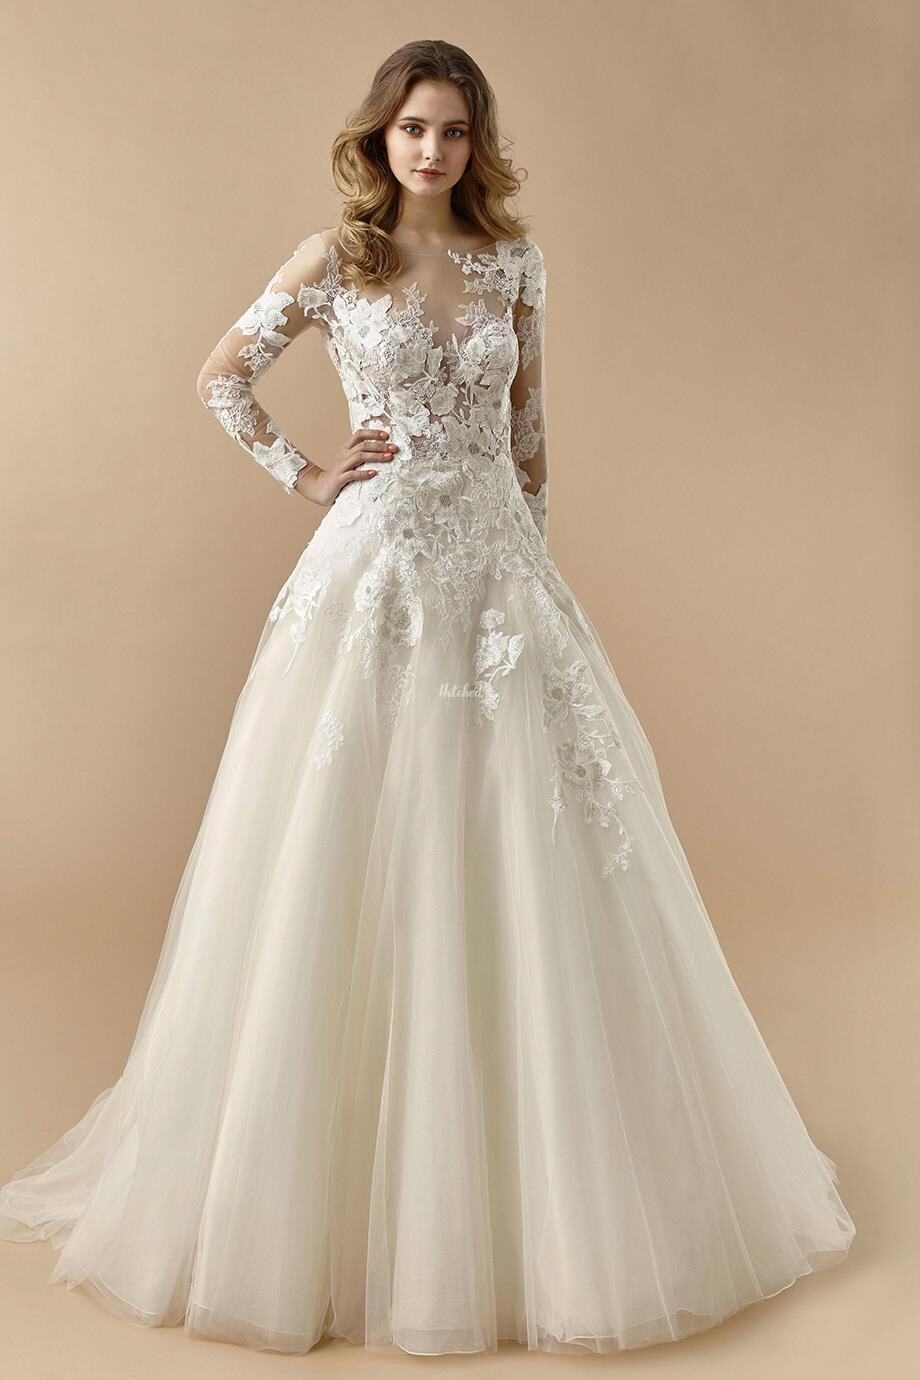 BT20-21 Wedding Dress from ETOILE - hitched.co.uk